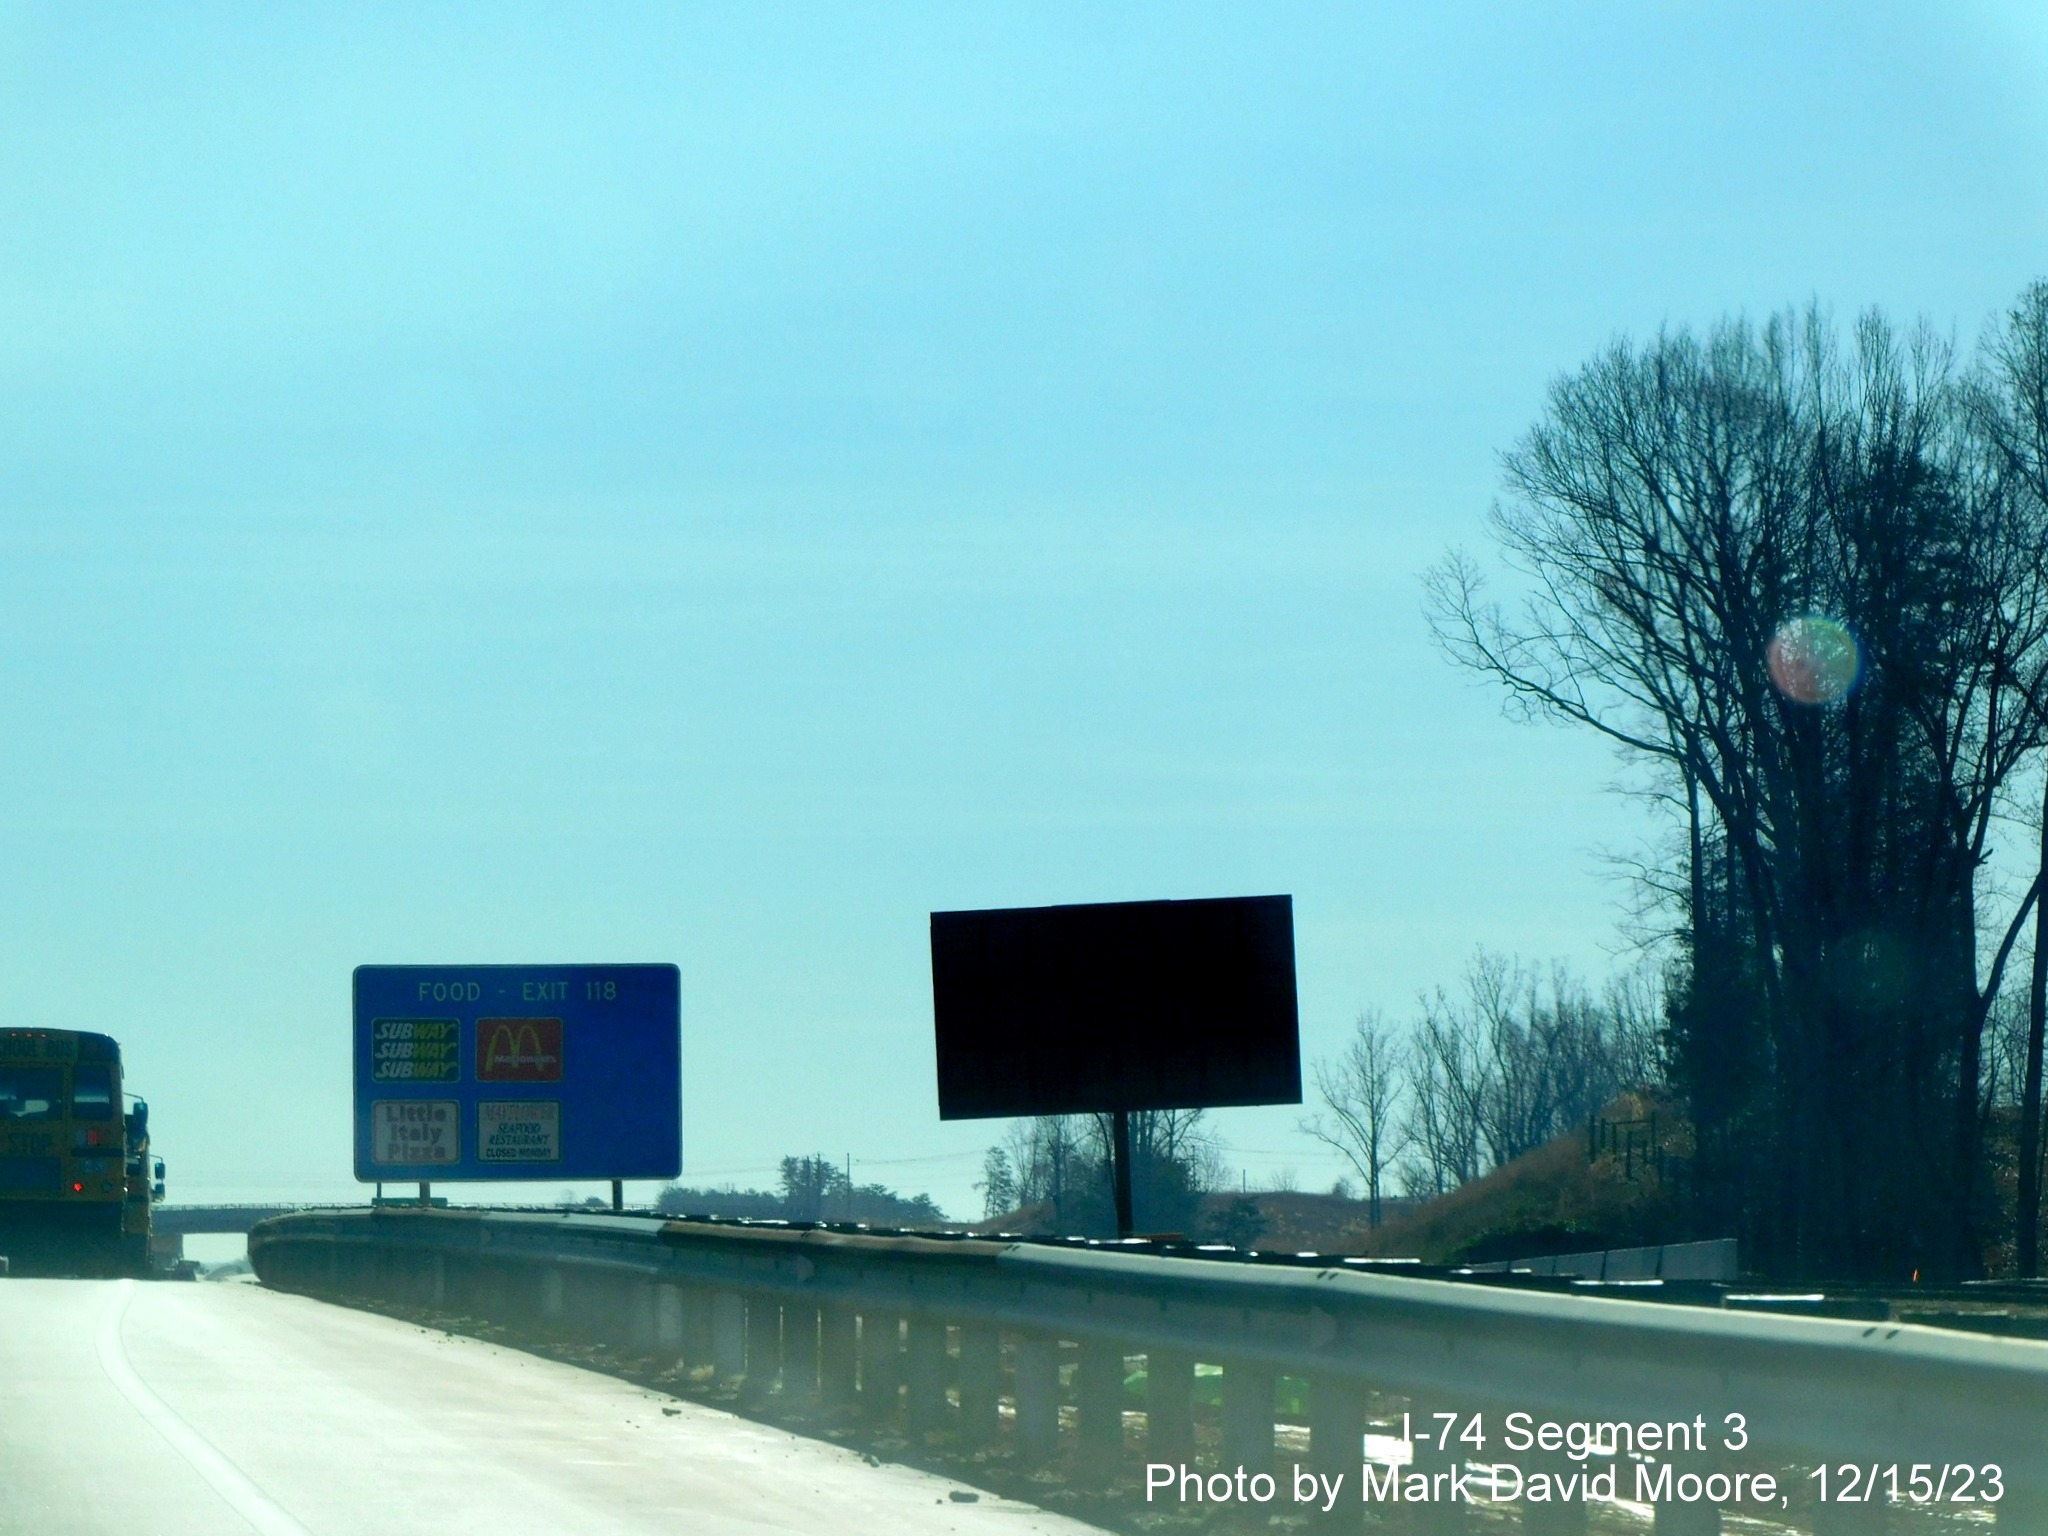 Image of temporary 1 mile VMS advance sign for completed Winston-Salem Northern Beltway interchange
        after the NC 65 exit, by Mark David Moore, December 2023